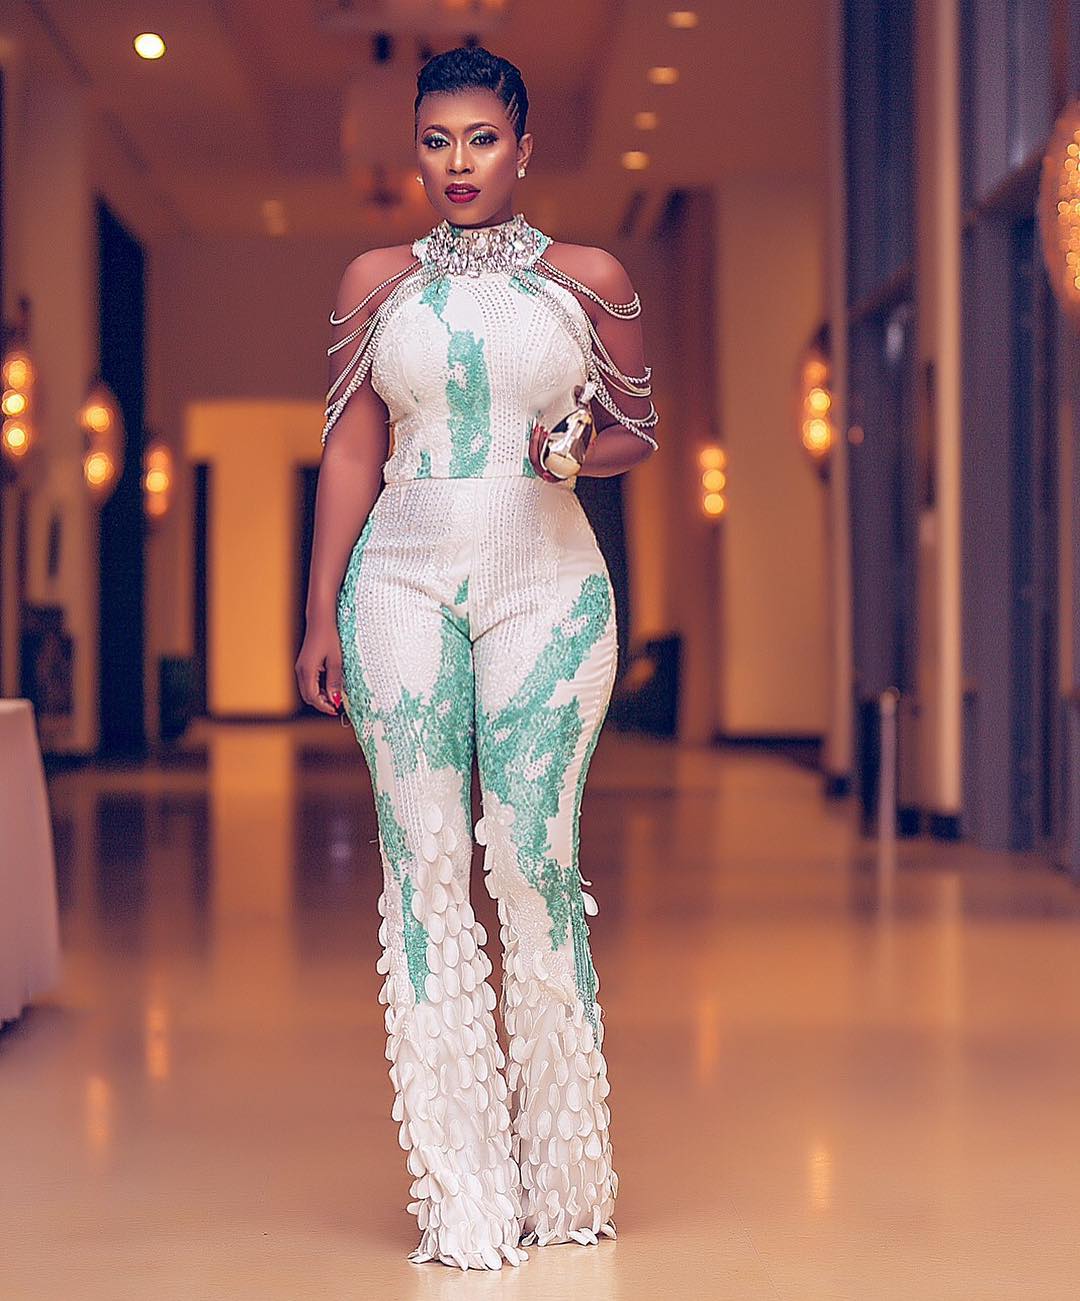 ghanaian-actress-selorm-galley-fiawoo-brings-heat-take-look-ritzy-style